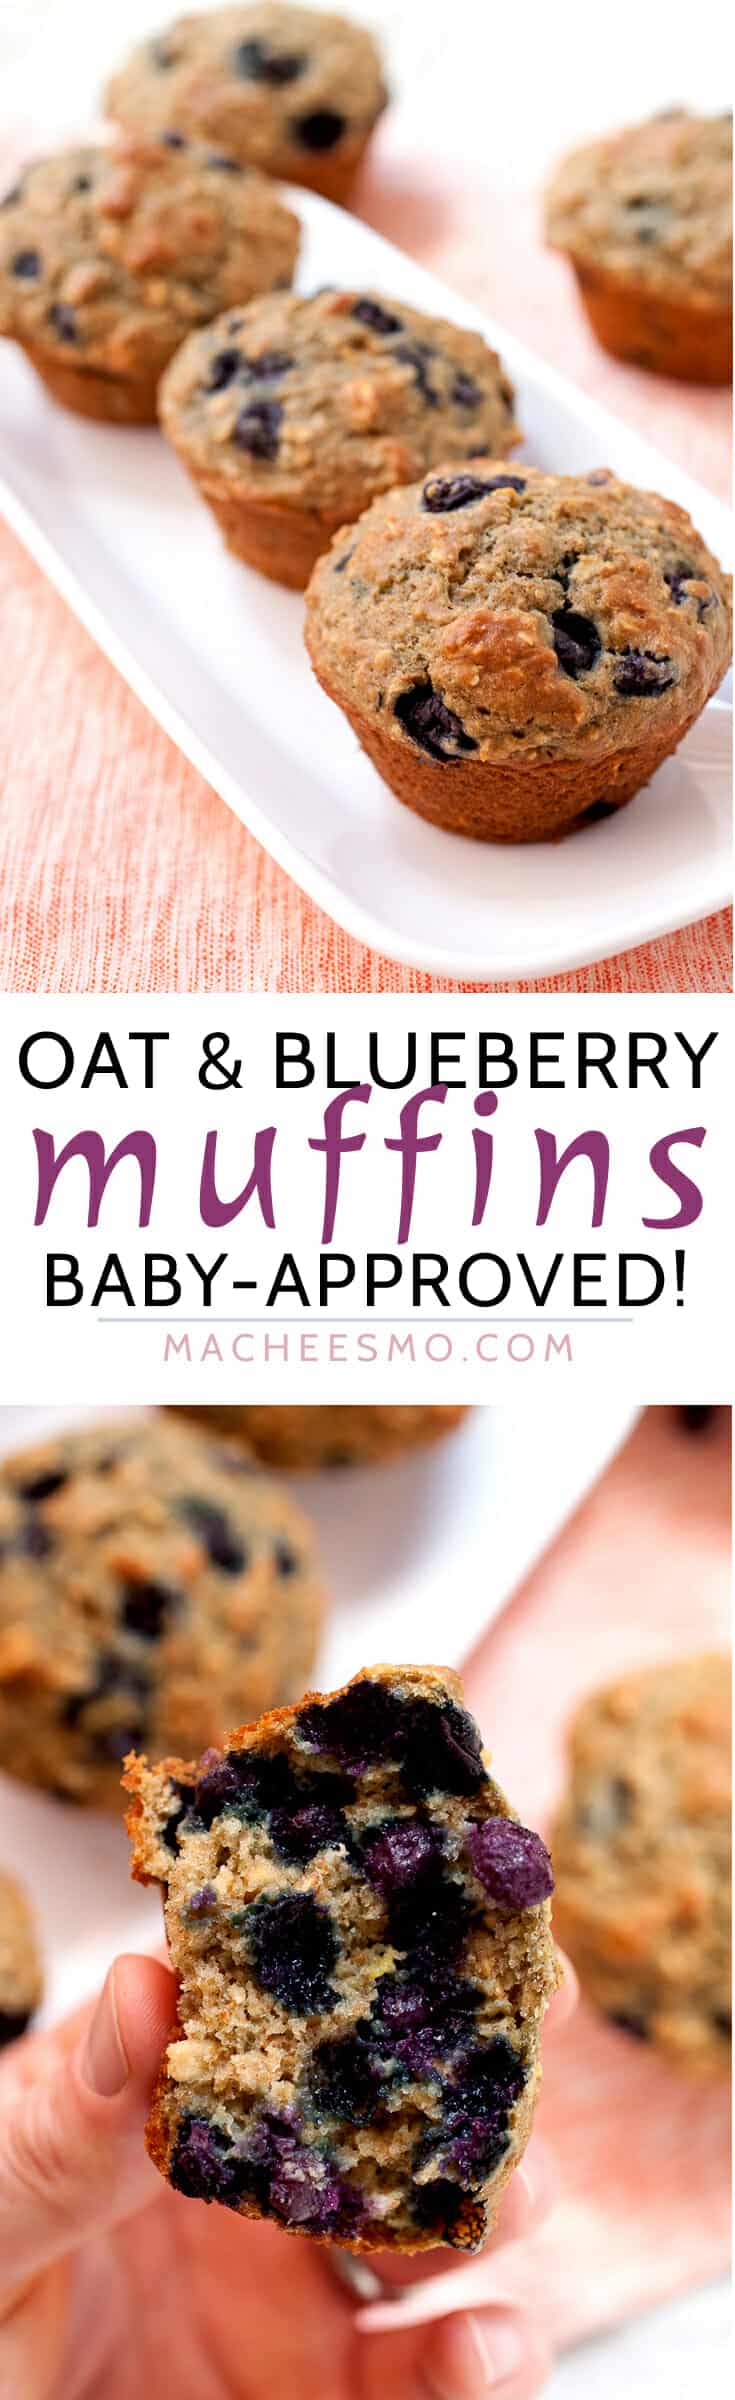 Oatmeal and Blueberry Muffins for Babies: The perfect quick breakfast for toddlers! Packed with oats and blueberries and super-reduced sugar content. Whole wheat, apple sauce, and fruit. Parents will love them too! | macheesmo.com